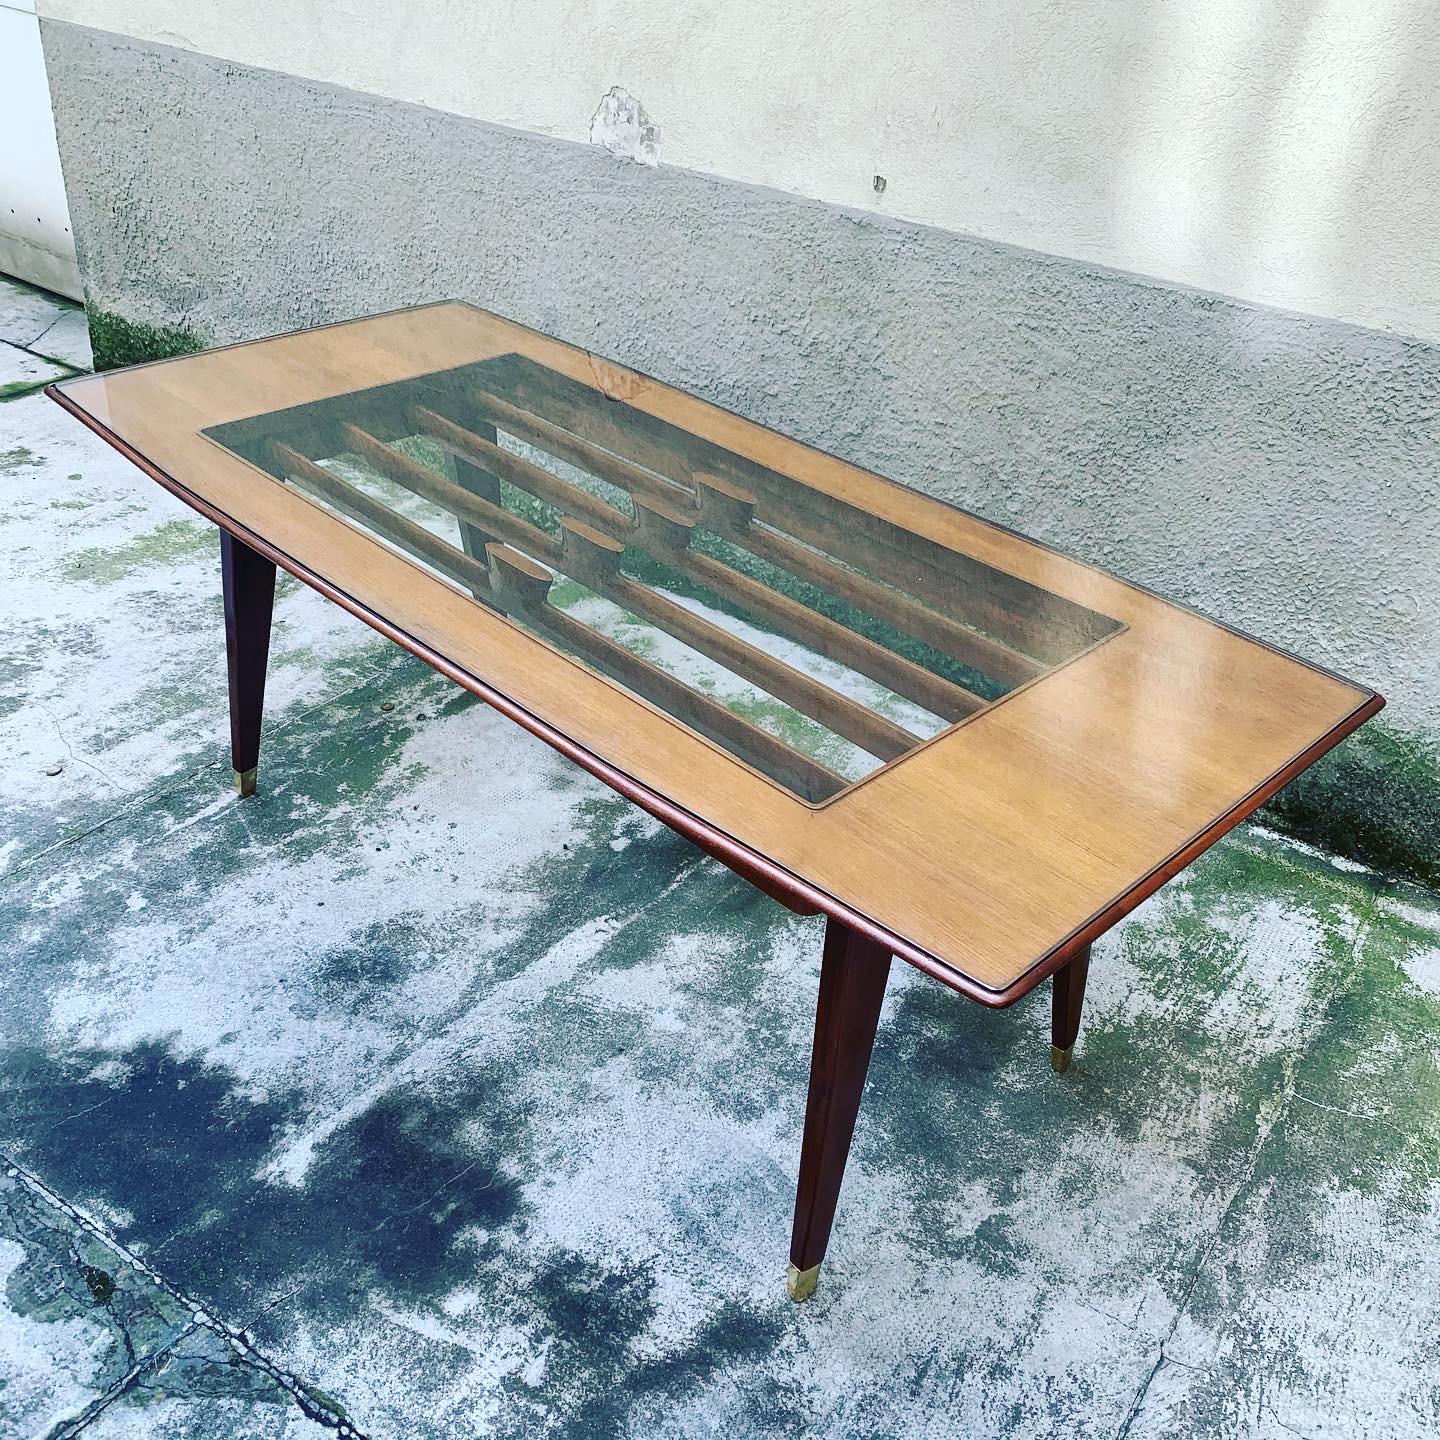 Beautiful Italian walnut dining table with brass feet, clear glass top framing an open solid wood decoration.

The table has been completely restored and polished.